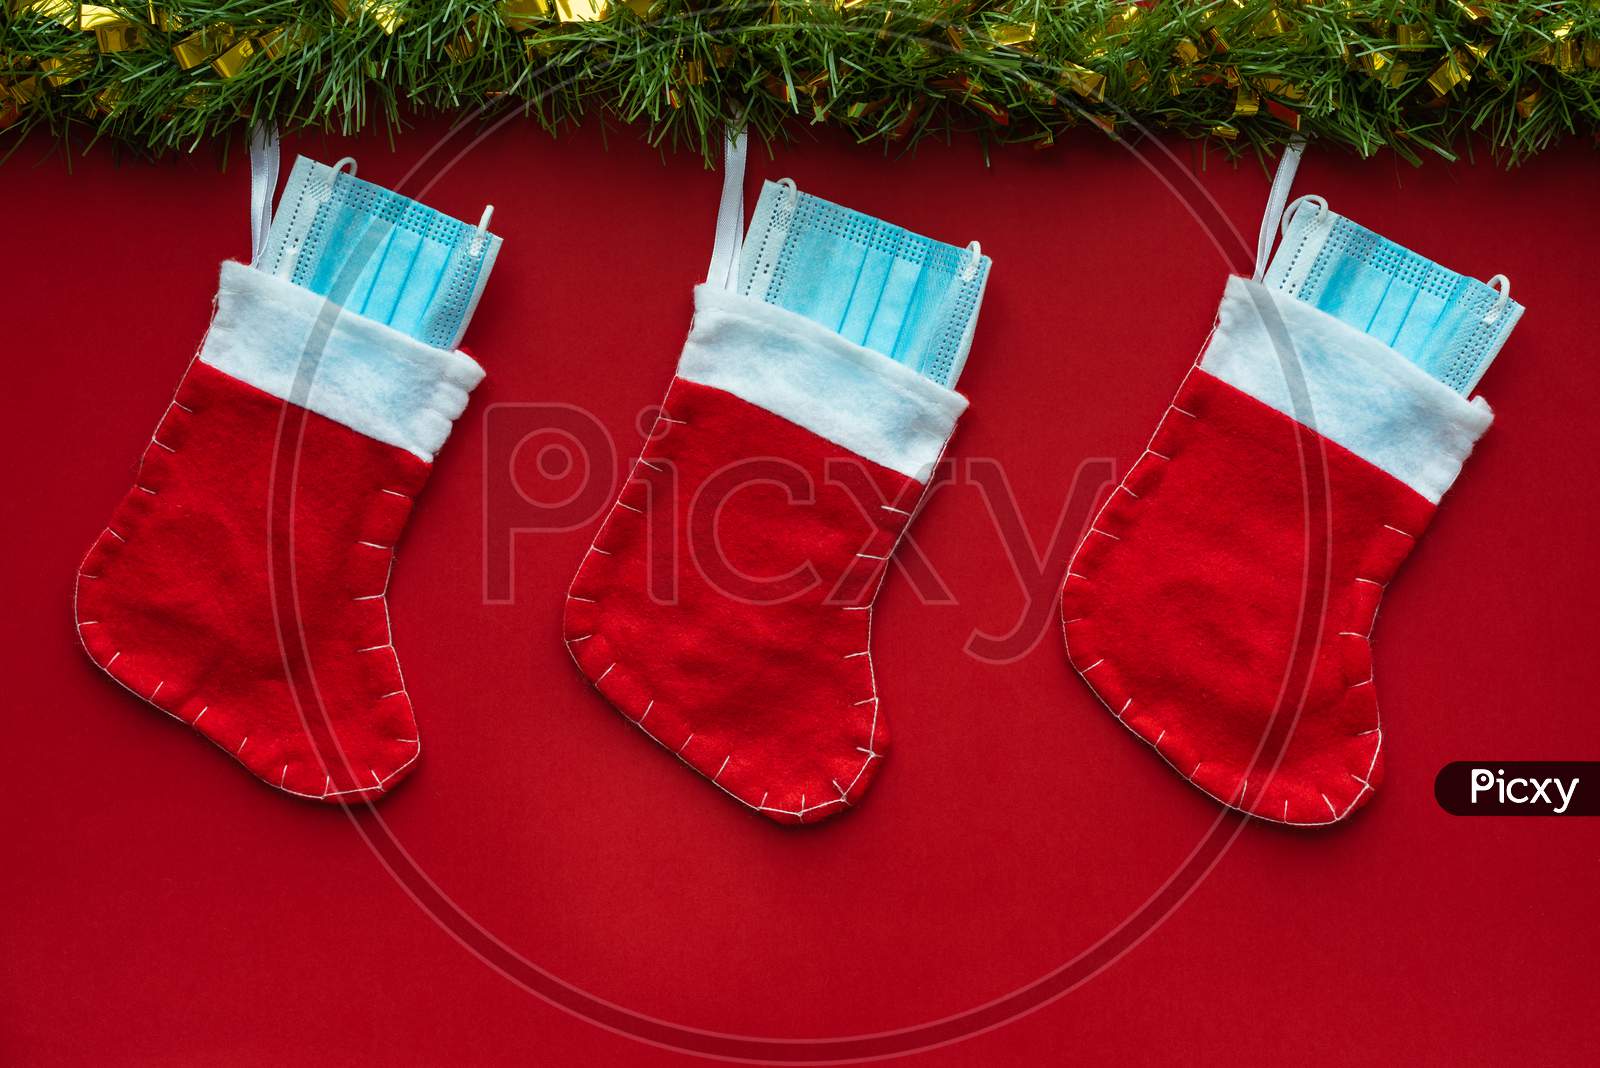 Christmas Decoration With Coronavirus On A Red Background, Christmas Socks, Face Masks And Hydroalcoholic Gels. Covid Concept On Christmas.